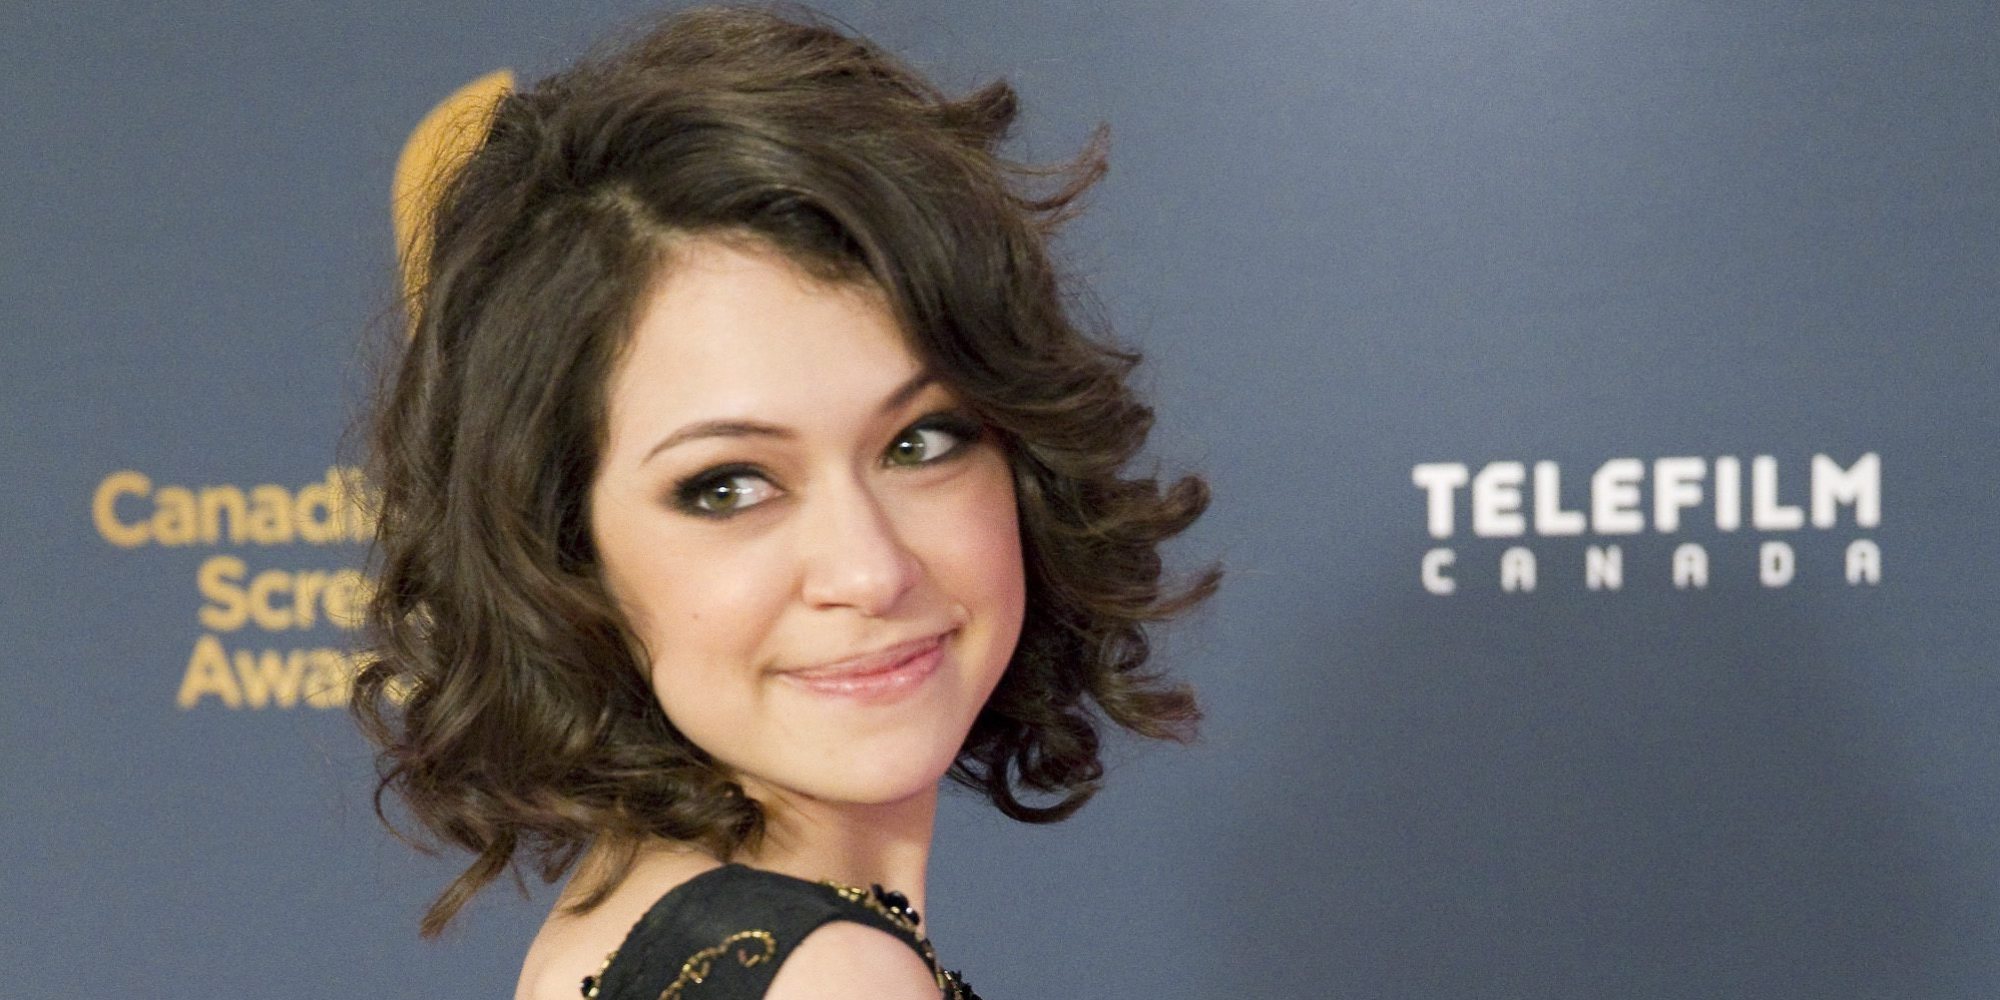 Tatiana Maslany Backgrounds, Compatible - PC, Mobile, Gadgets| 2000x1000 px